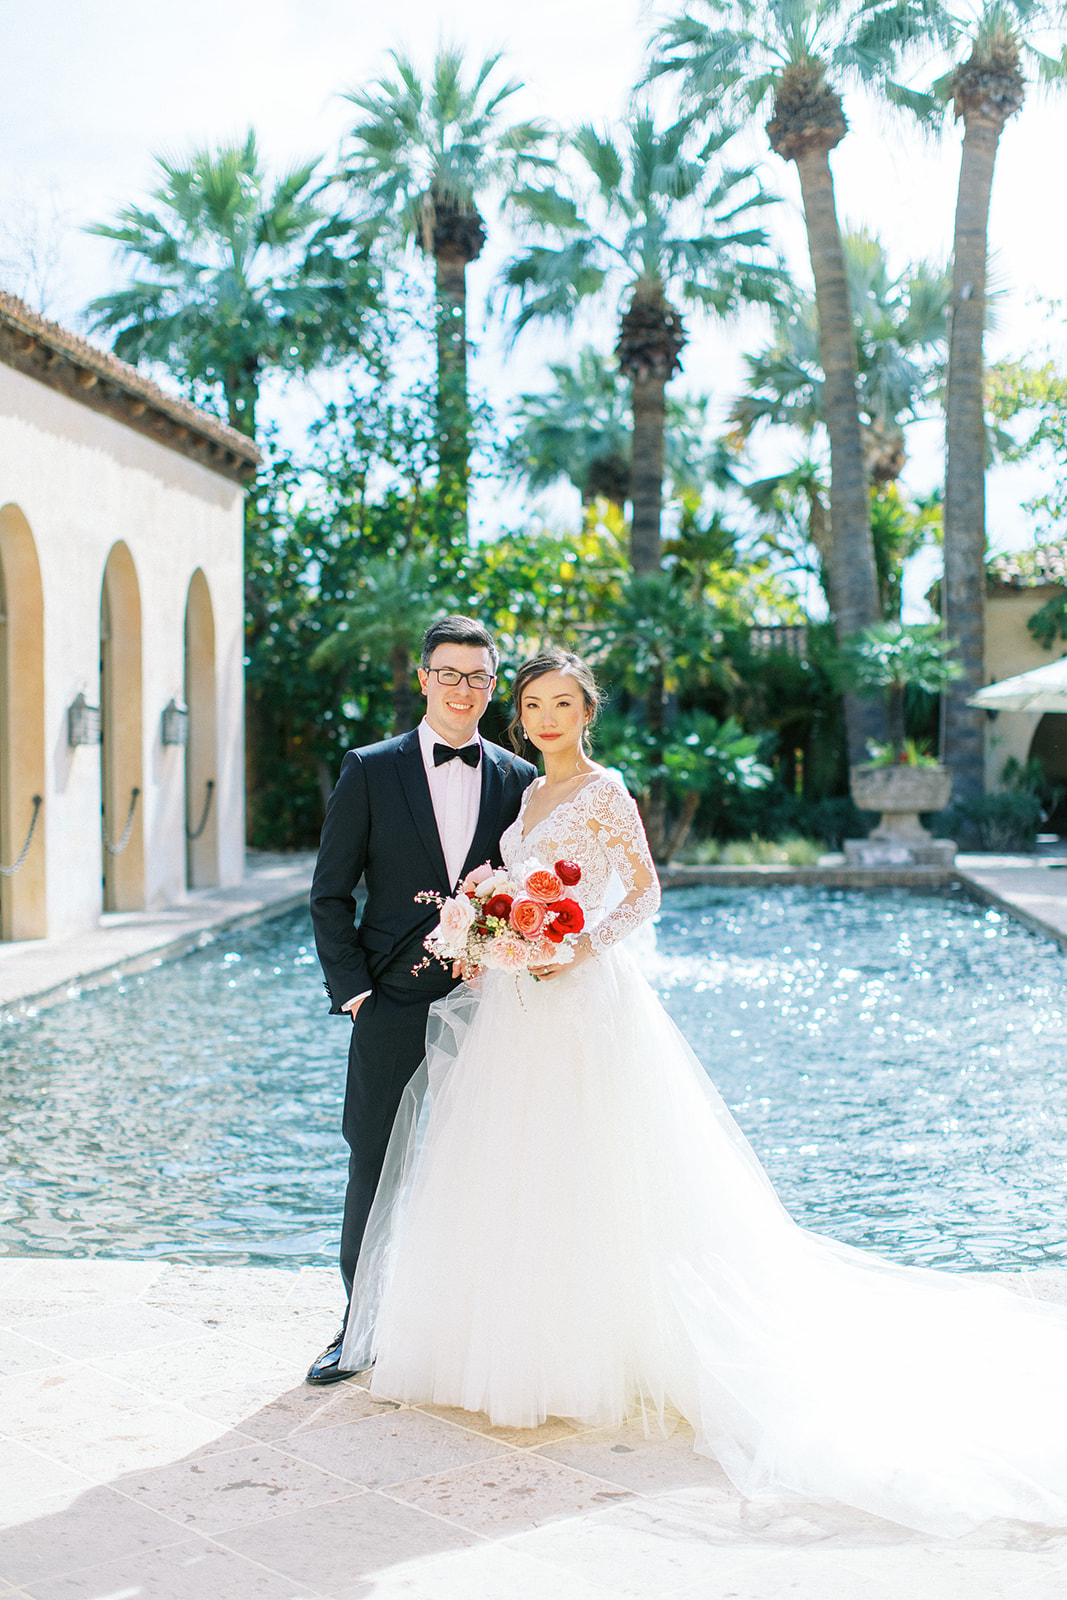 Groom and bride holding bouquet standing next to each other in front of large fountain pool.